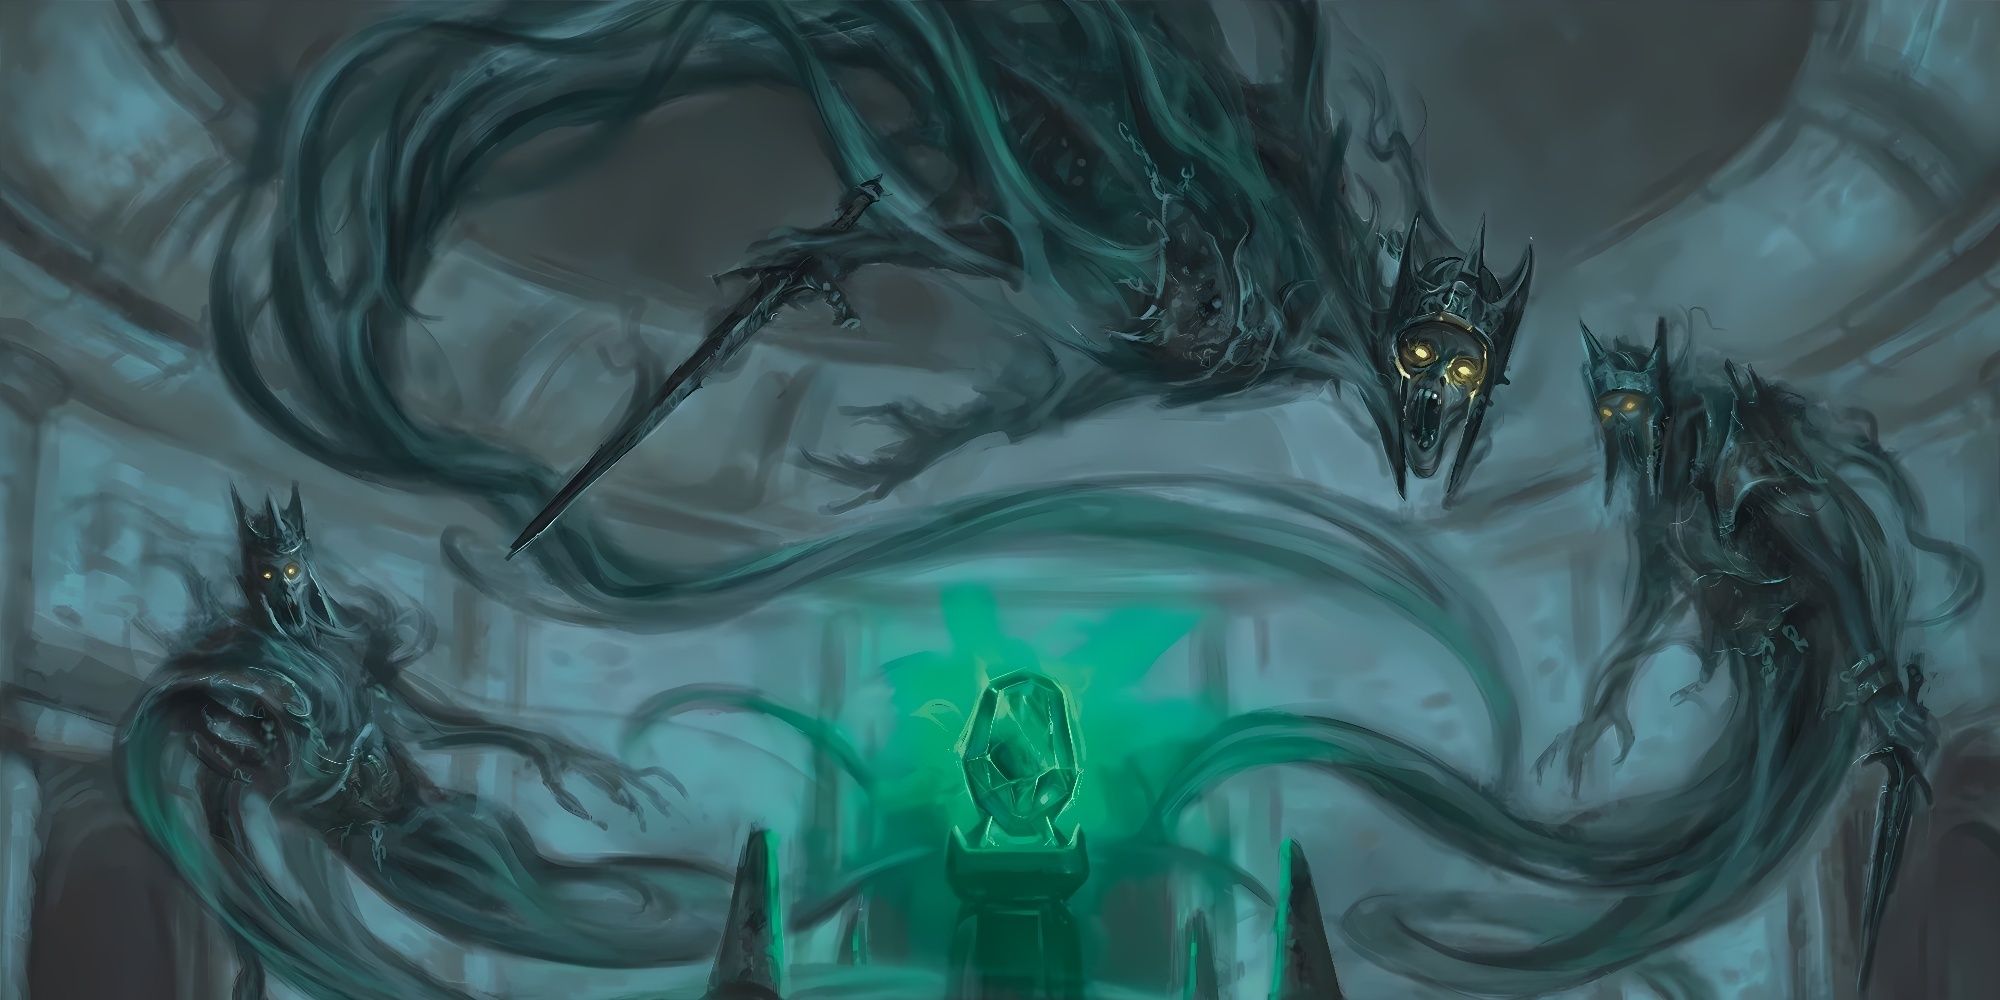 3 wraiths circling within a sanctum with a green crystal at the centre.